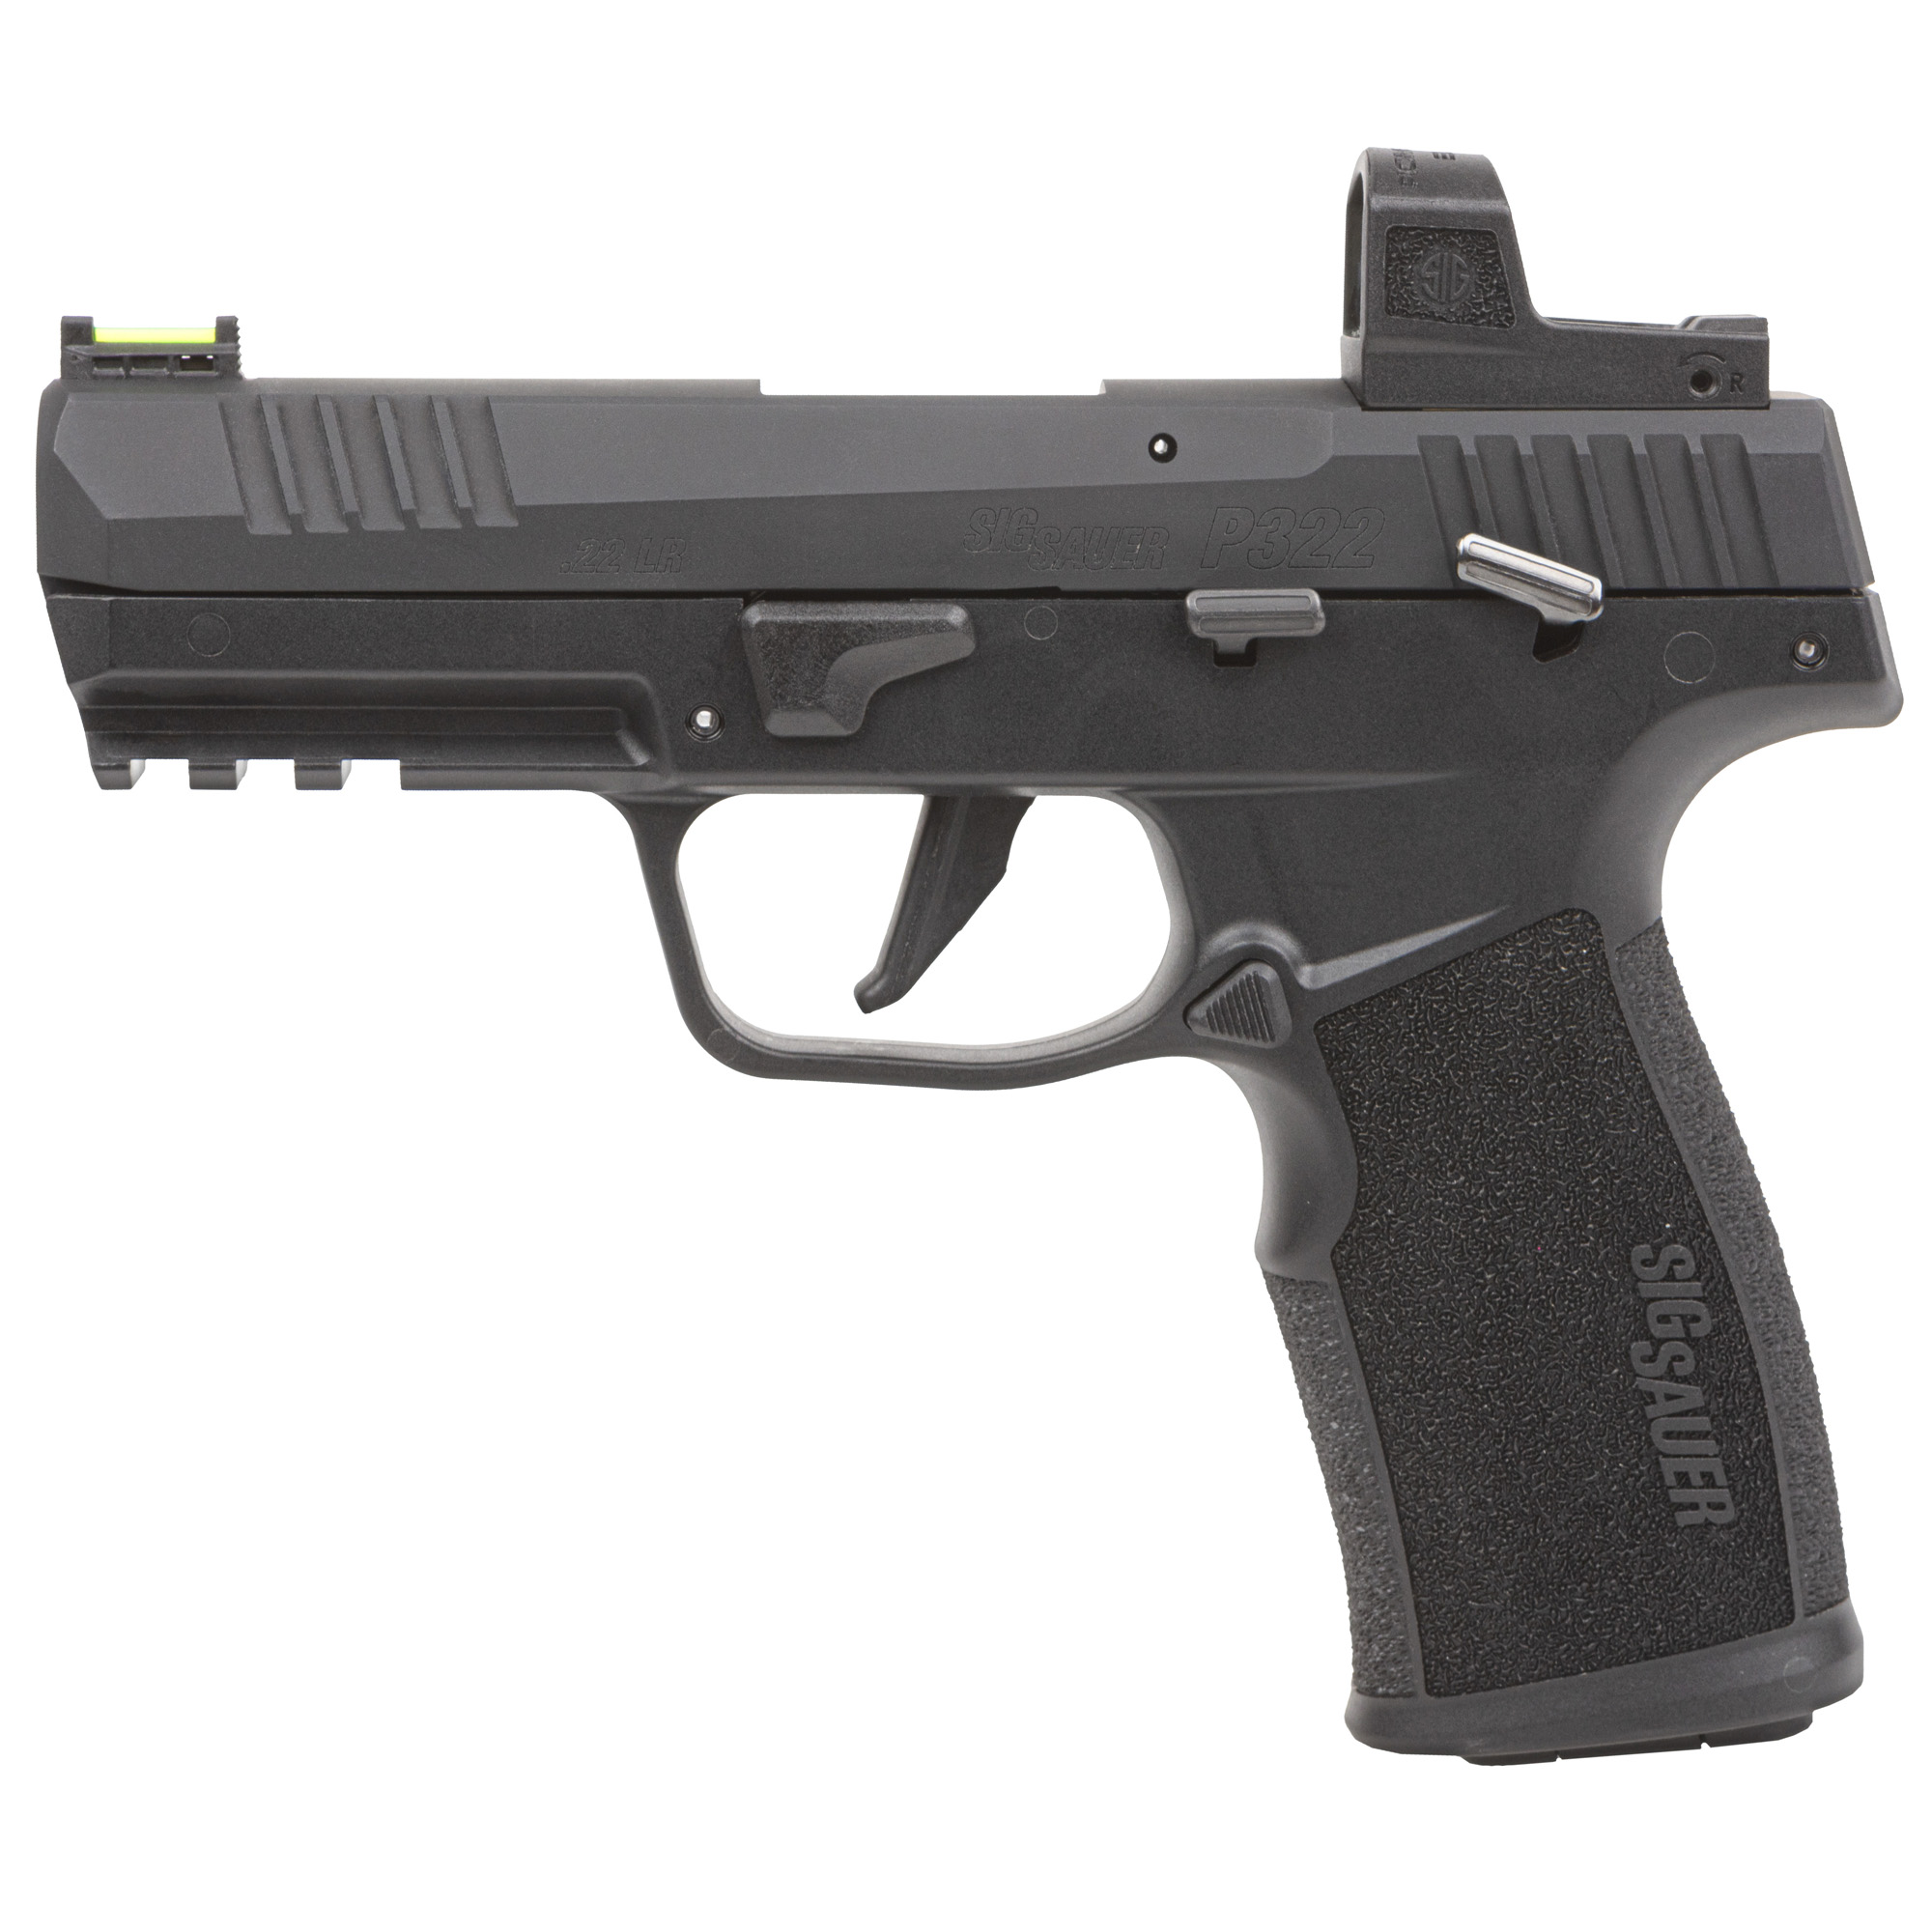 Sig Sauer, P322, Semi-automatic, Single Action Only, Polymer Frame Pistol, Full Size, 22 LR, 4 Barrel